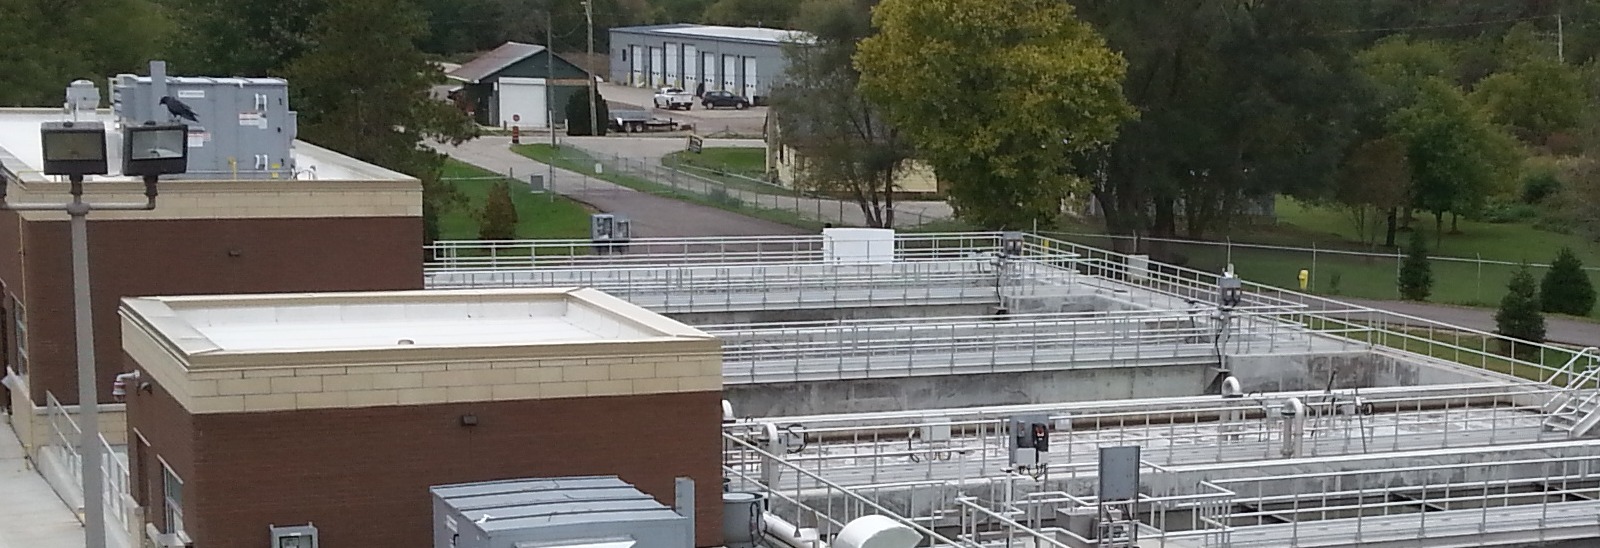 Ingersoll wastewater treatment plant